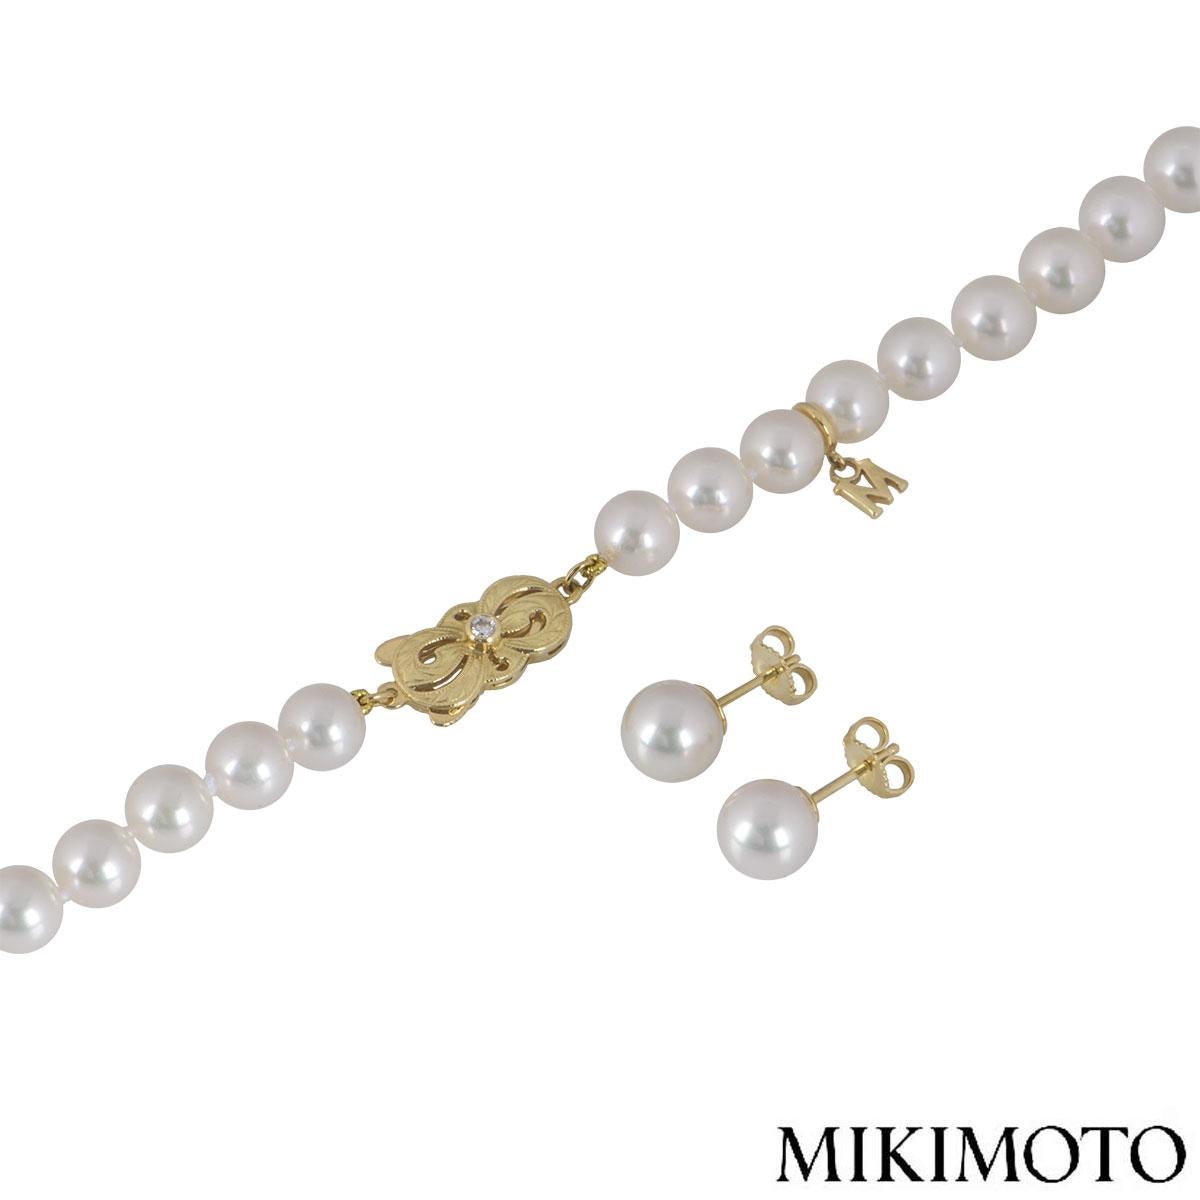 An 18k yellow gold diamond and pearl suite by Mikimoto. The suite features a necklace set with 56 Akoya cultured pearls measuring between approximately 7.00mm - 8.00mm with a single round brilliant cut diamond on the clasp approximately 0.04ct. The